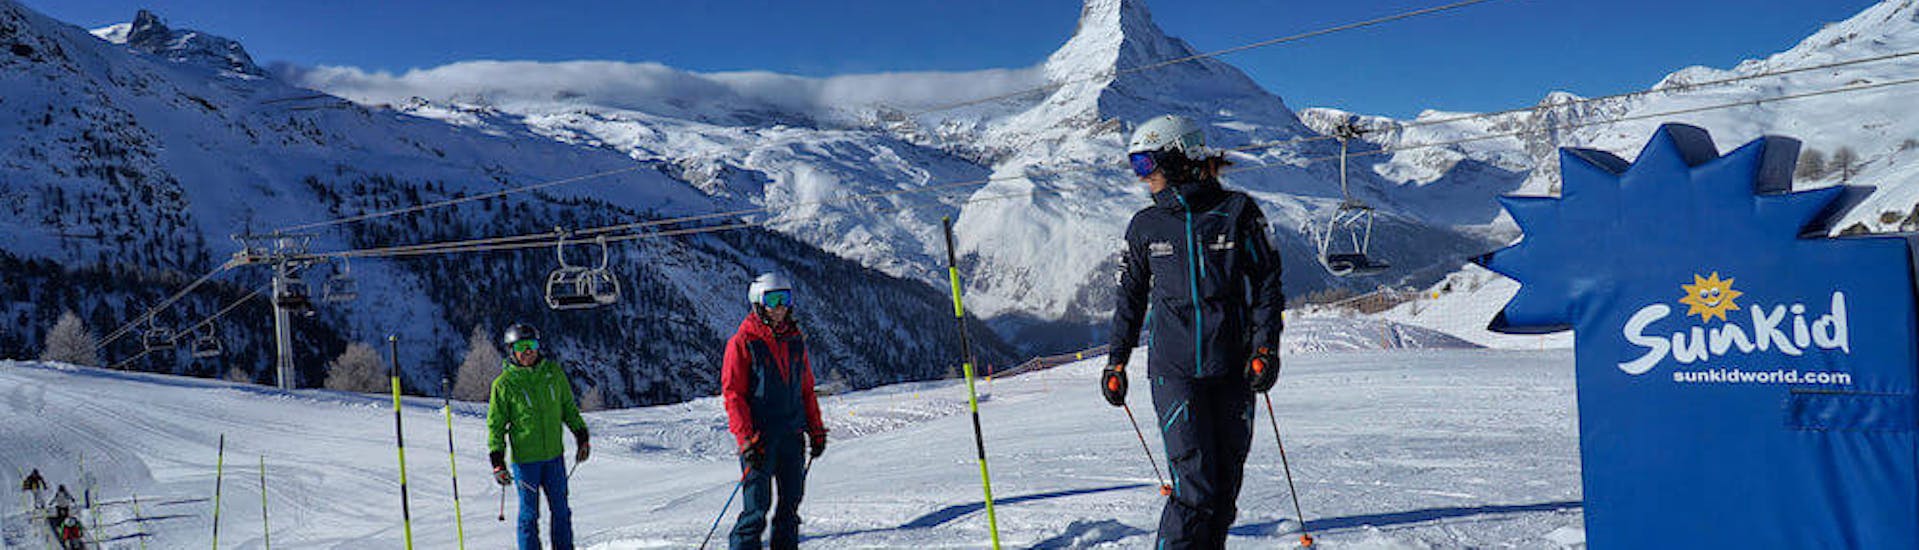 Ski instructor and students going up on magic carpet during the Private Ski Lessons for First Timers - 3 days with Stocked Snowsports School Zermatt